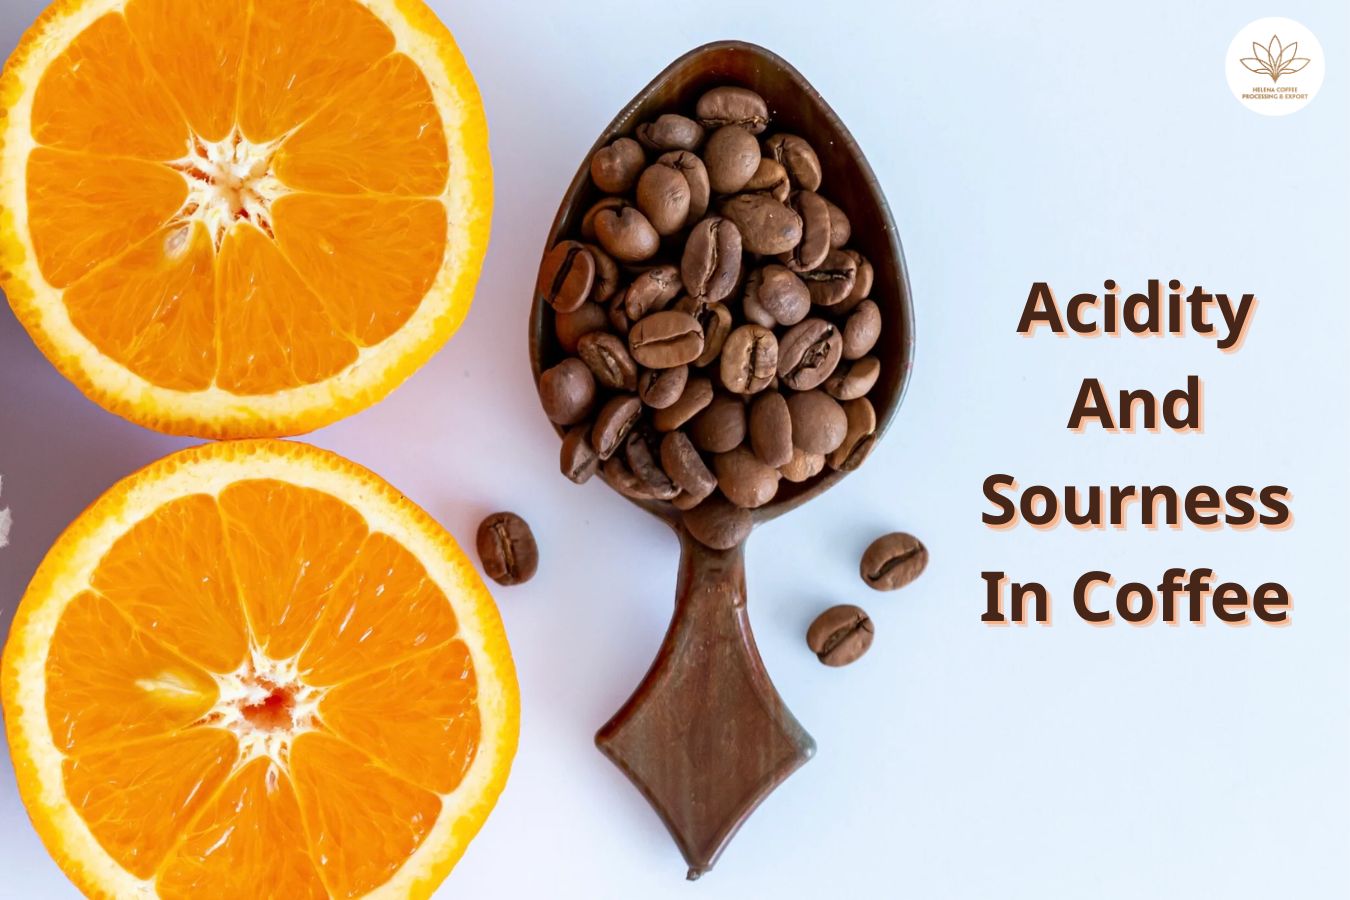 Acidity And Sourness In Coffee